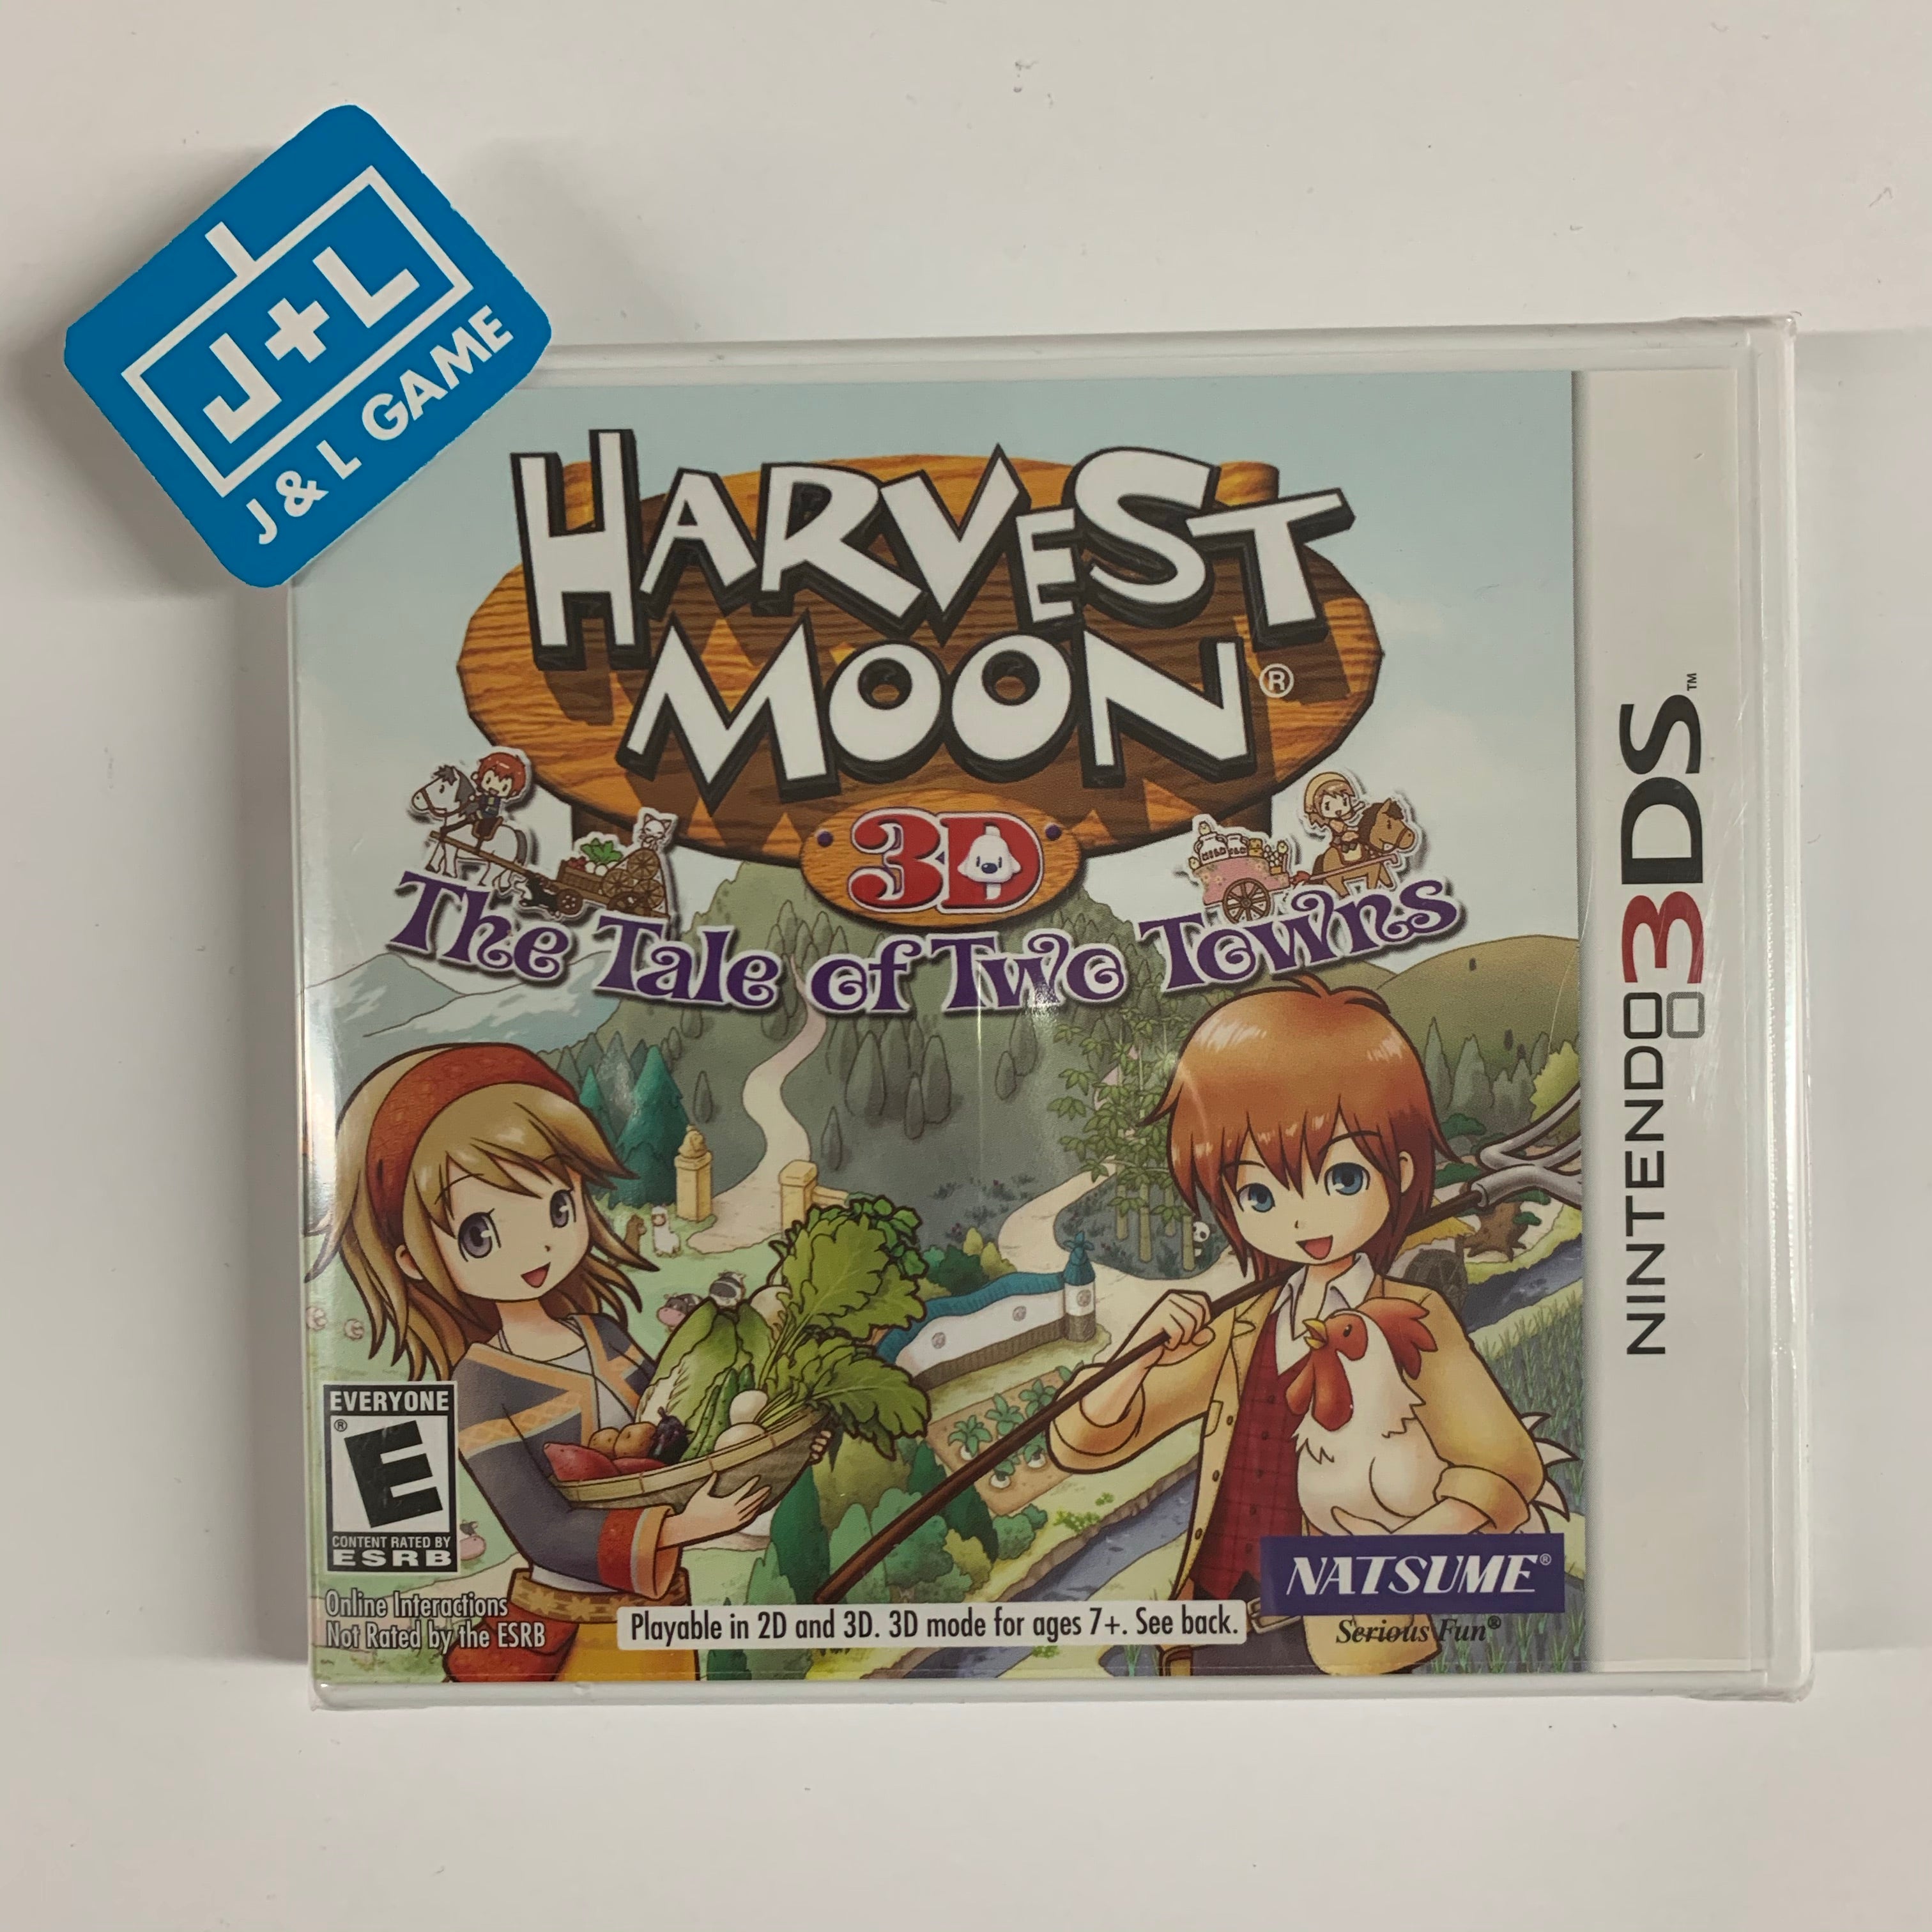 Harvest Moon 3D: The Tale of Two Towns - Nintendo 3DS [NEW] Video Games Natsume   